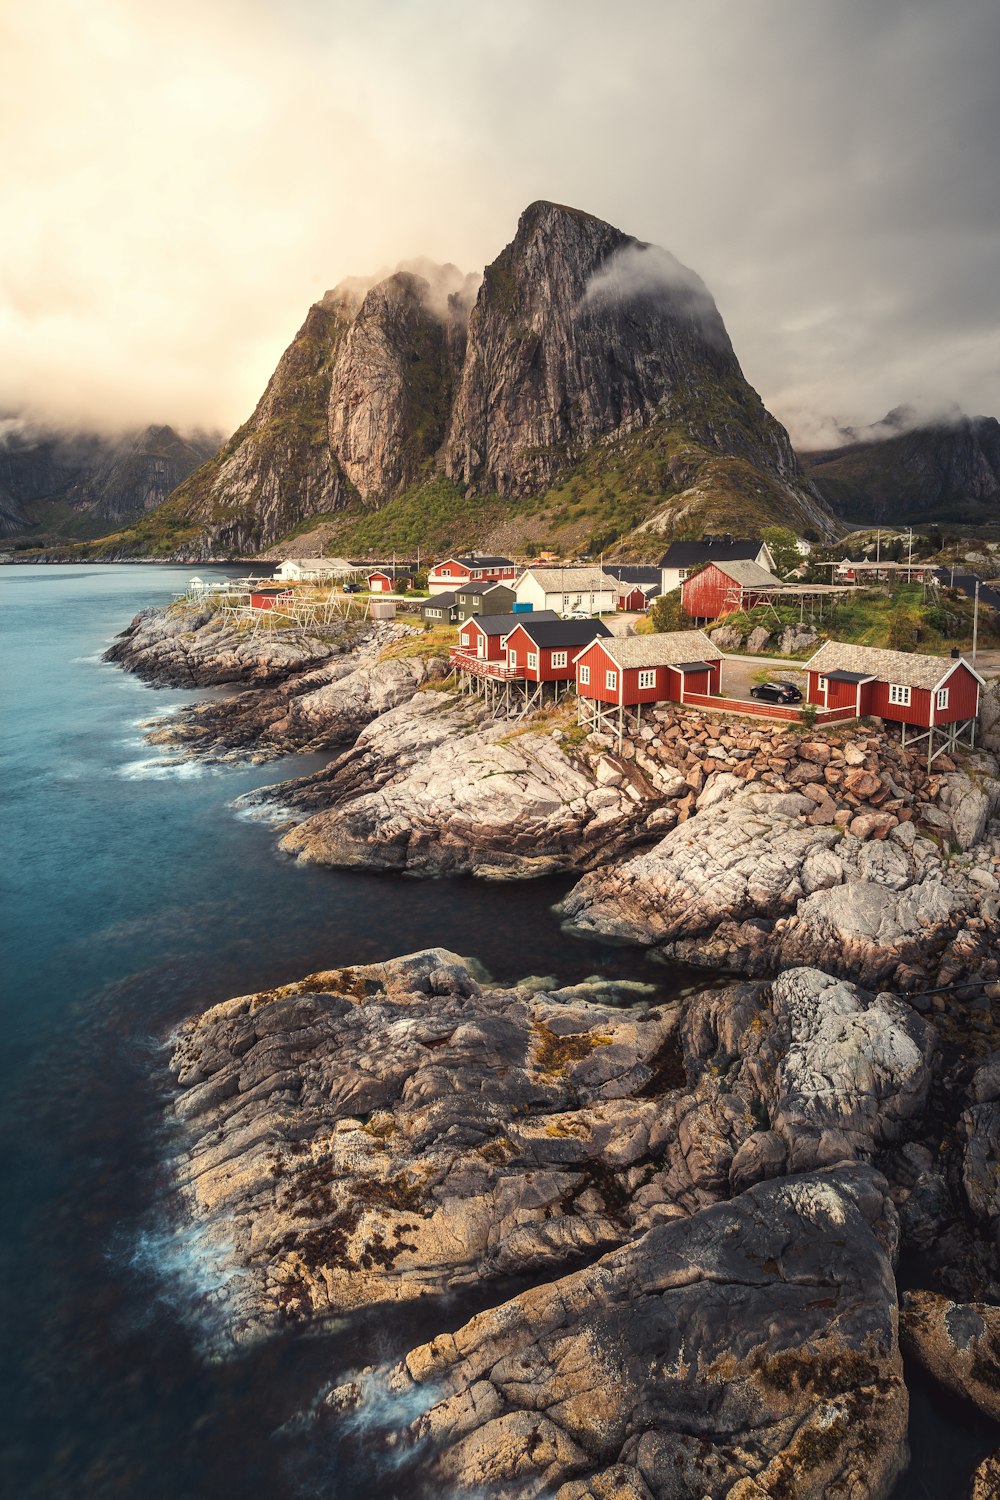 a scenic view of a rocky coastline with houses and mountains in the background